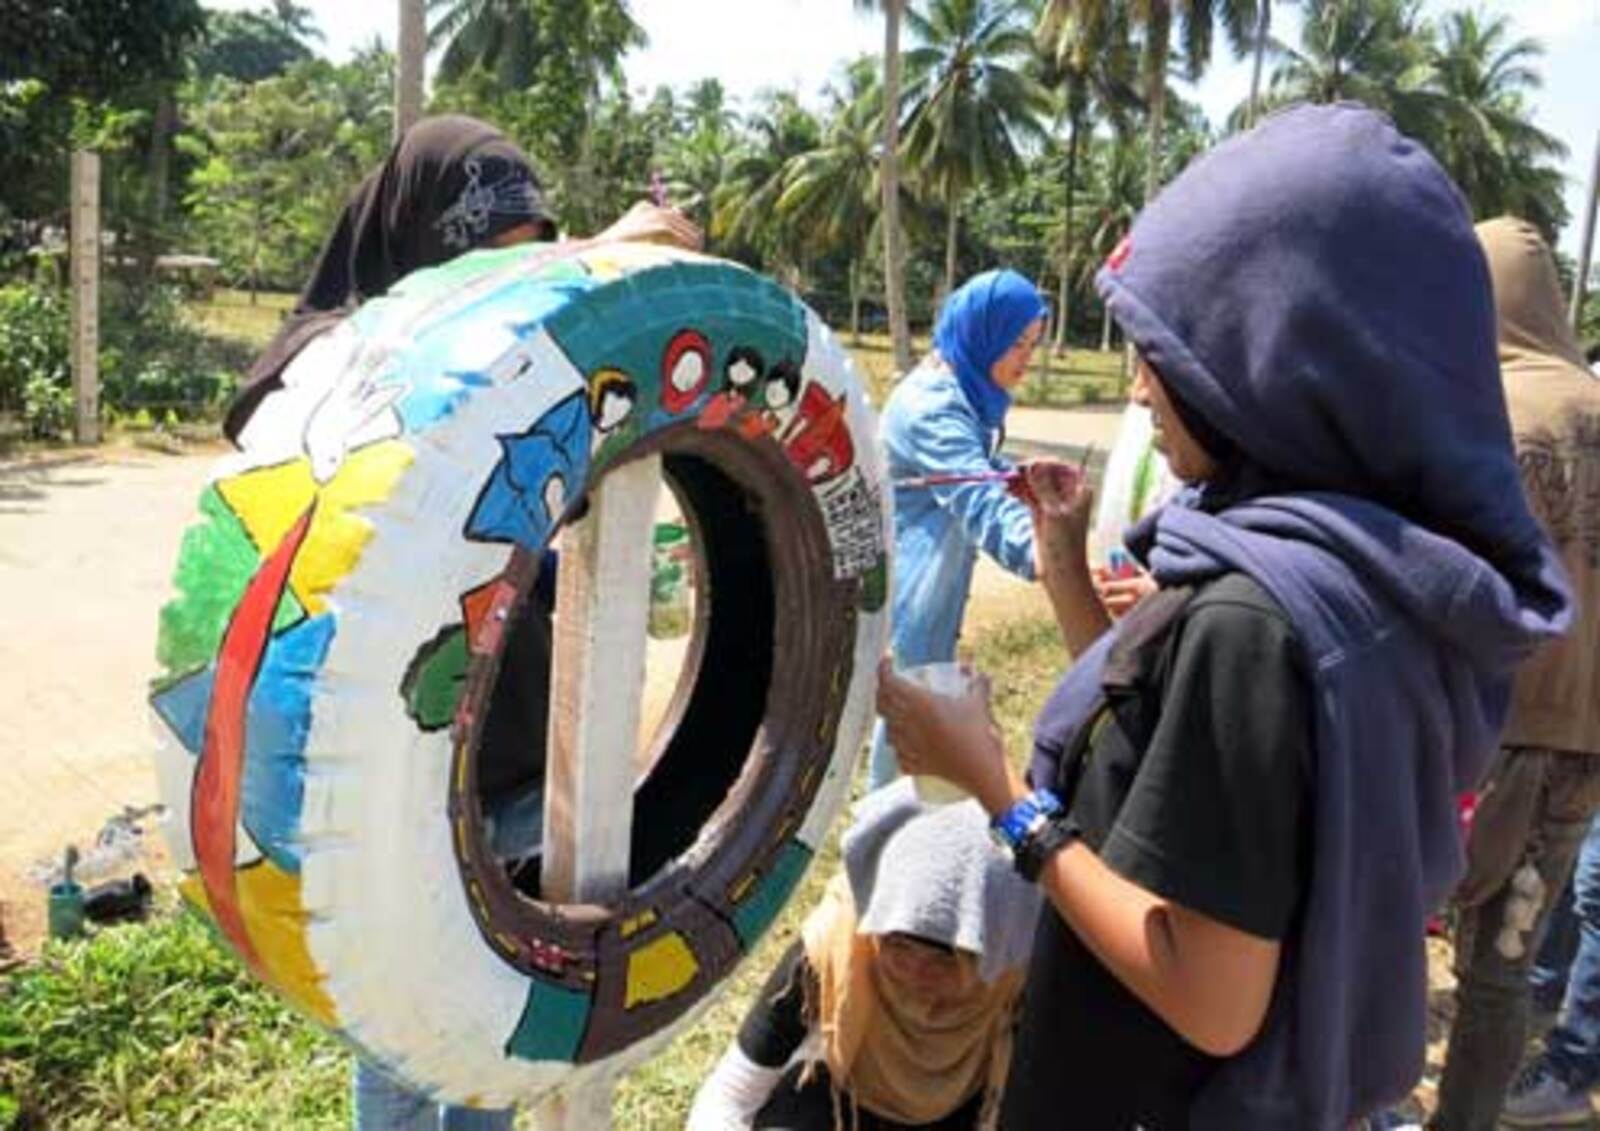 The event attracted young artists from the area who showcased their talents in a variety of forms, including tire painting, above, to promote messages of peace and unity. 